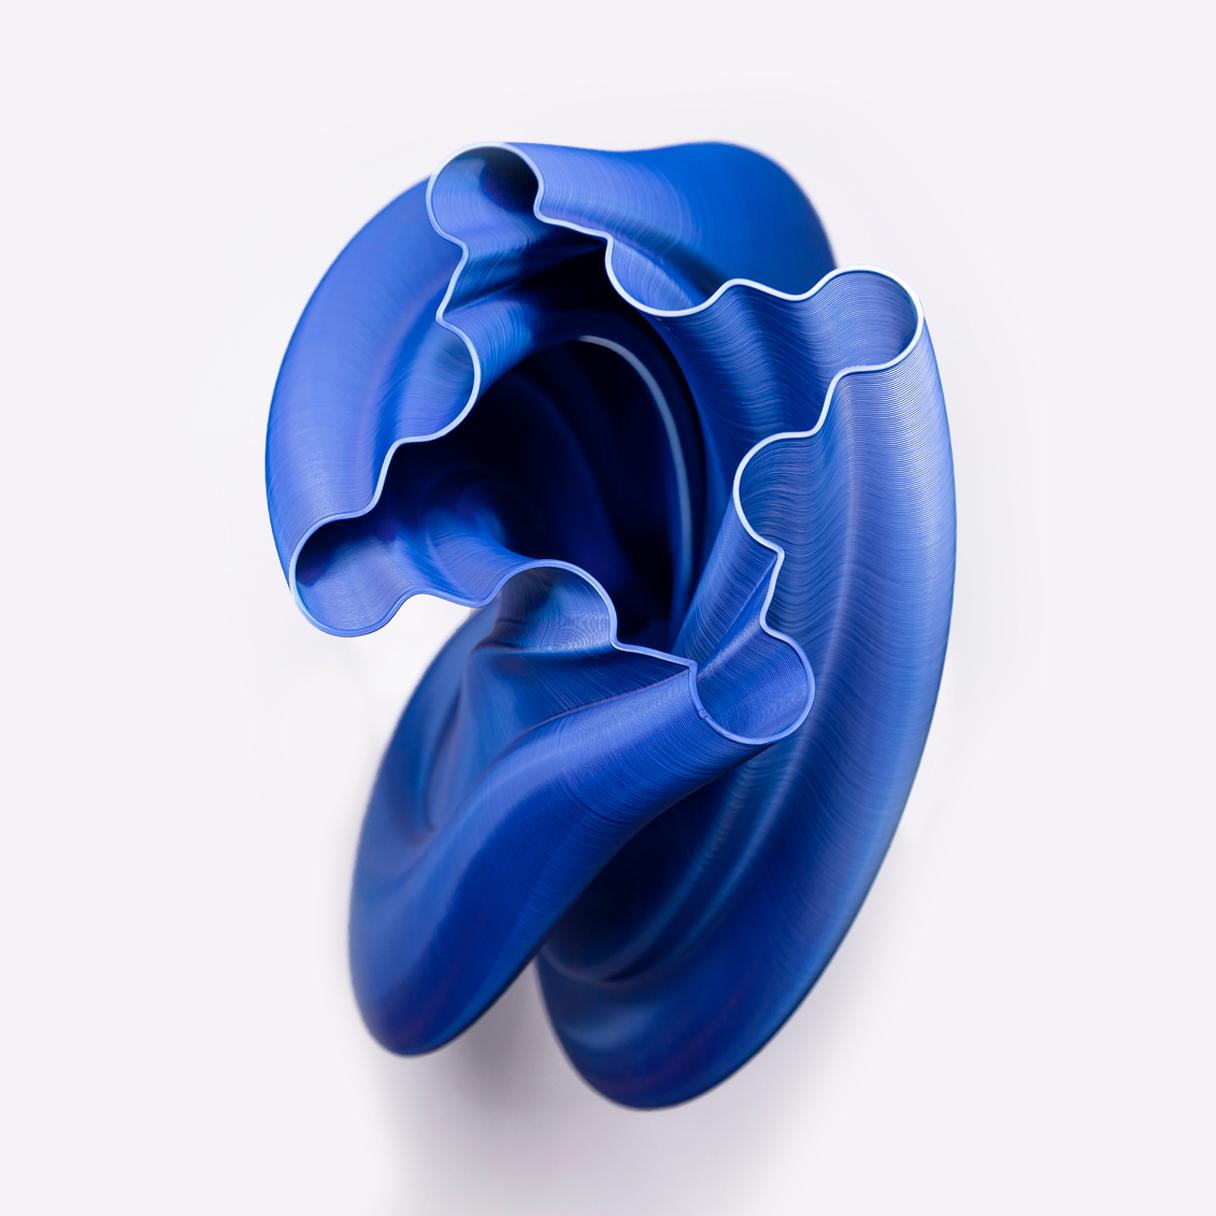 Italian Damocle, Blue Contemporary Sustainable Vase-Sculpture For Sale